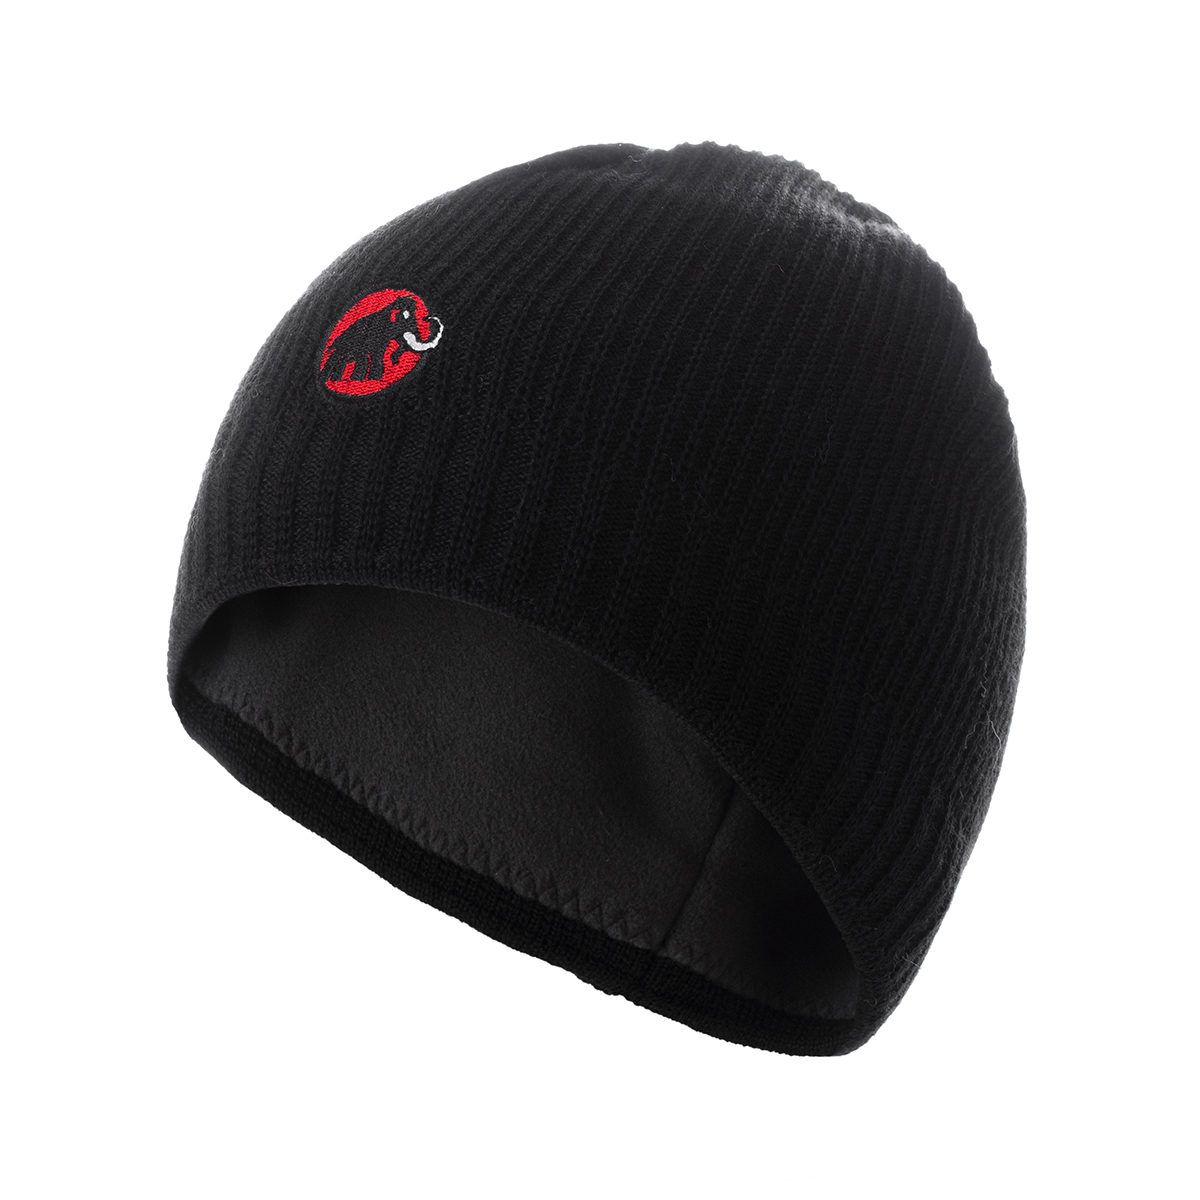 Mammut Sublime Beanie :: Head gear :: Clothing Accessories :: Clothing ...